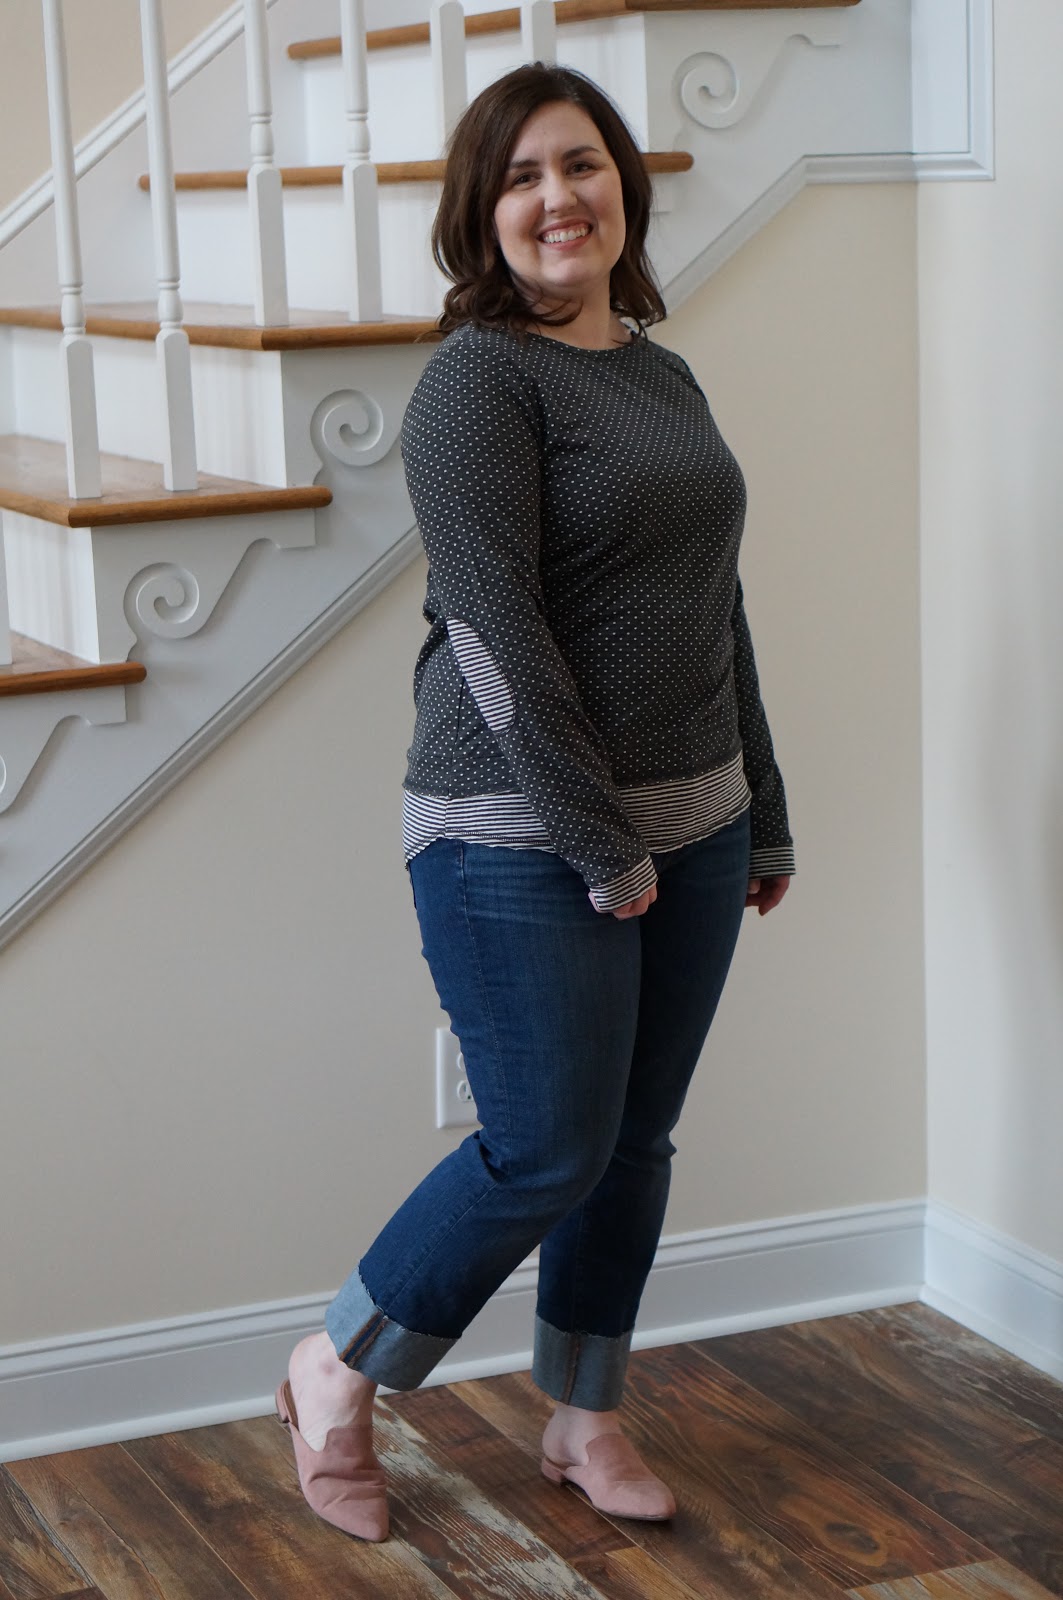 STITCH FIX REVIEW | MARCH 2018 OUTFITS by popular North Carolina style blogger Rebecca Lately